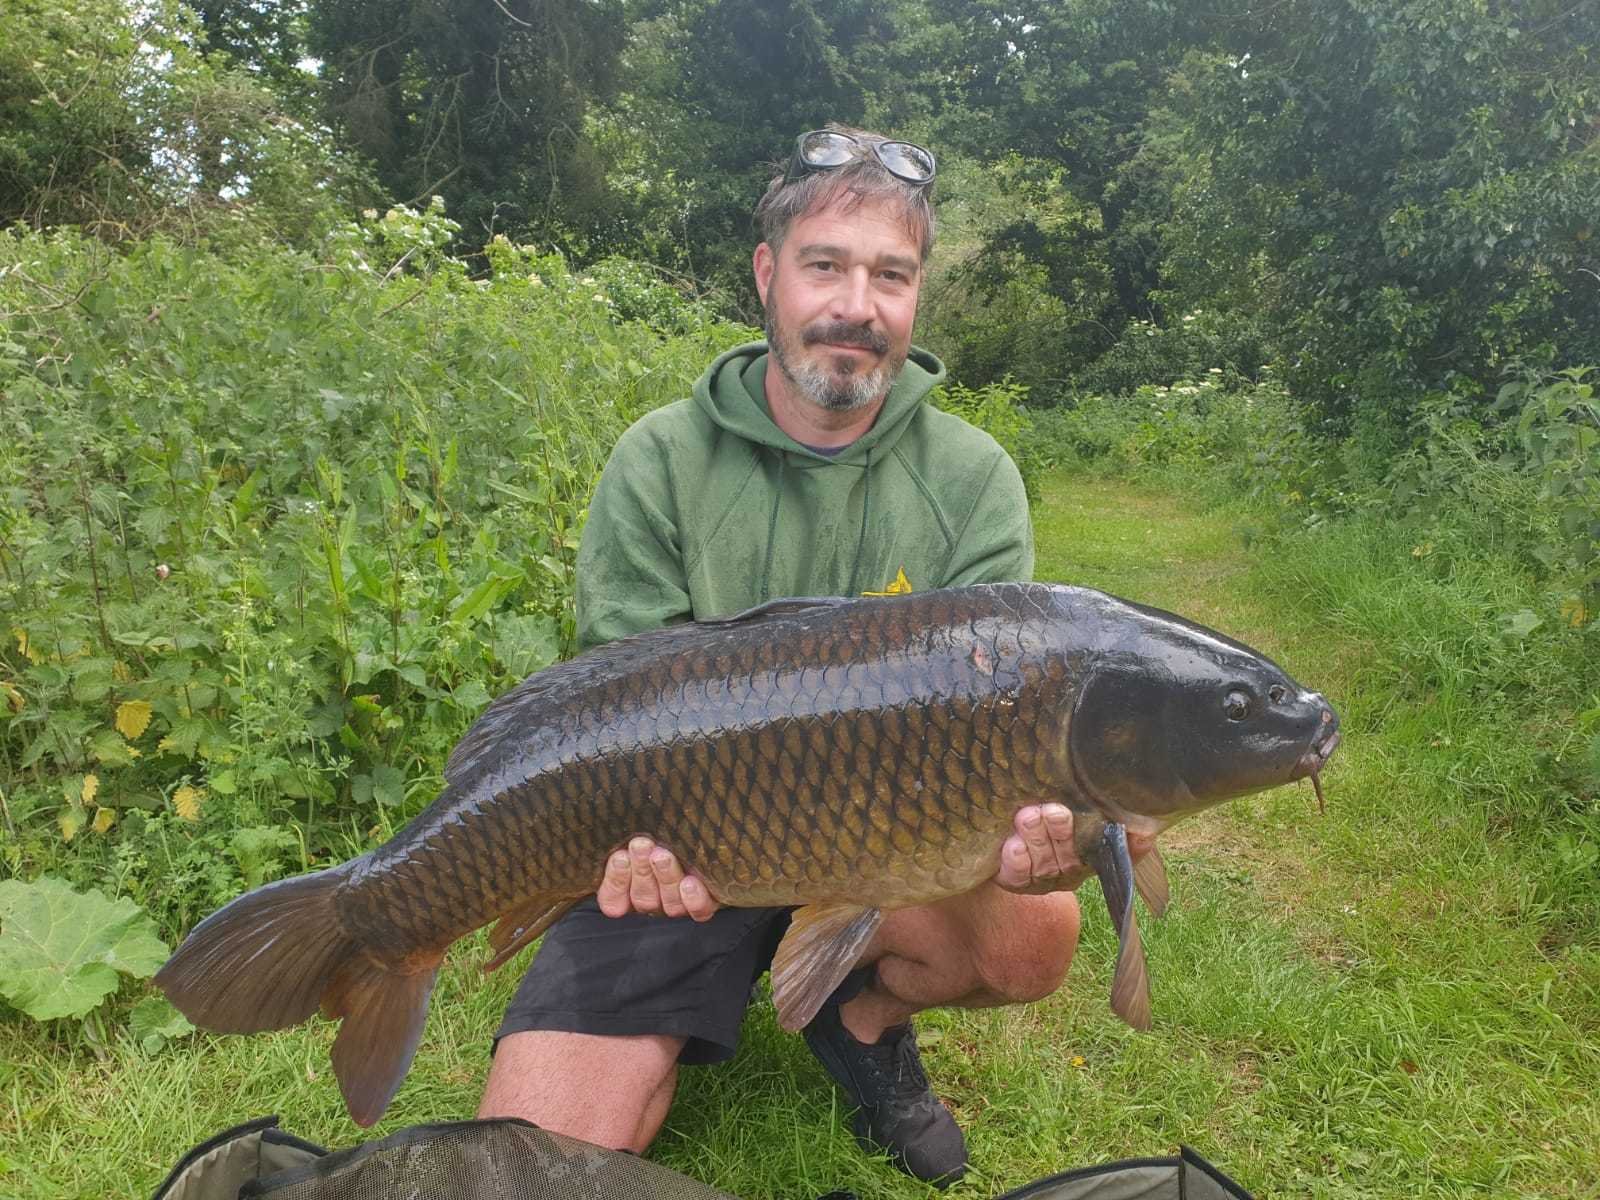 Steve with a lovely Carp from Langham